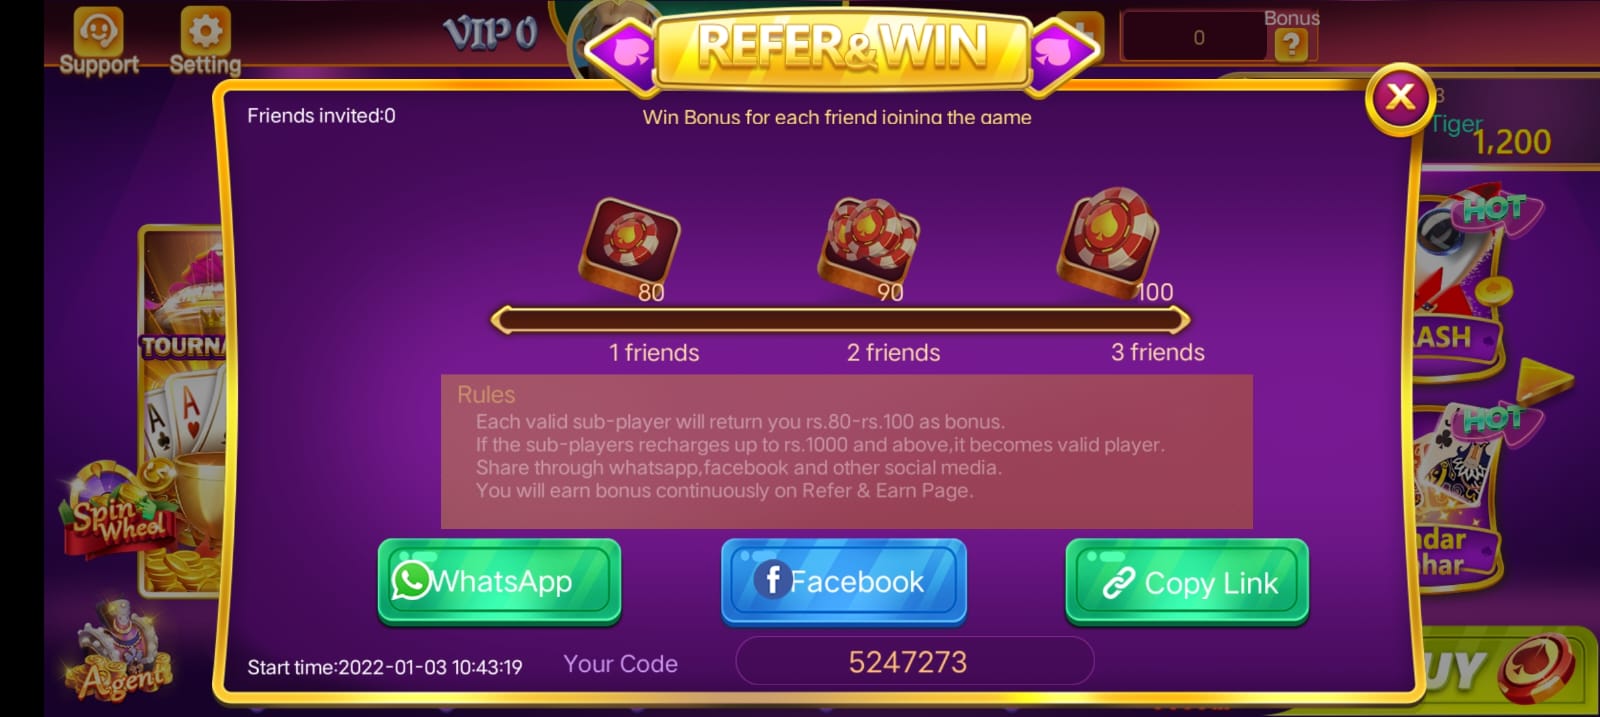 Refer & Earn Option In Rummy Tour Apk